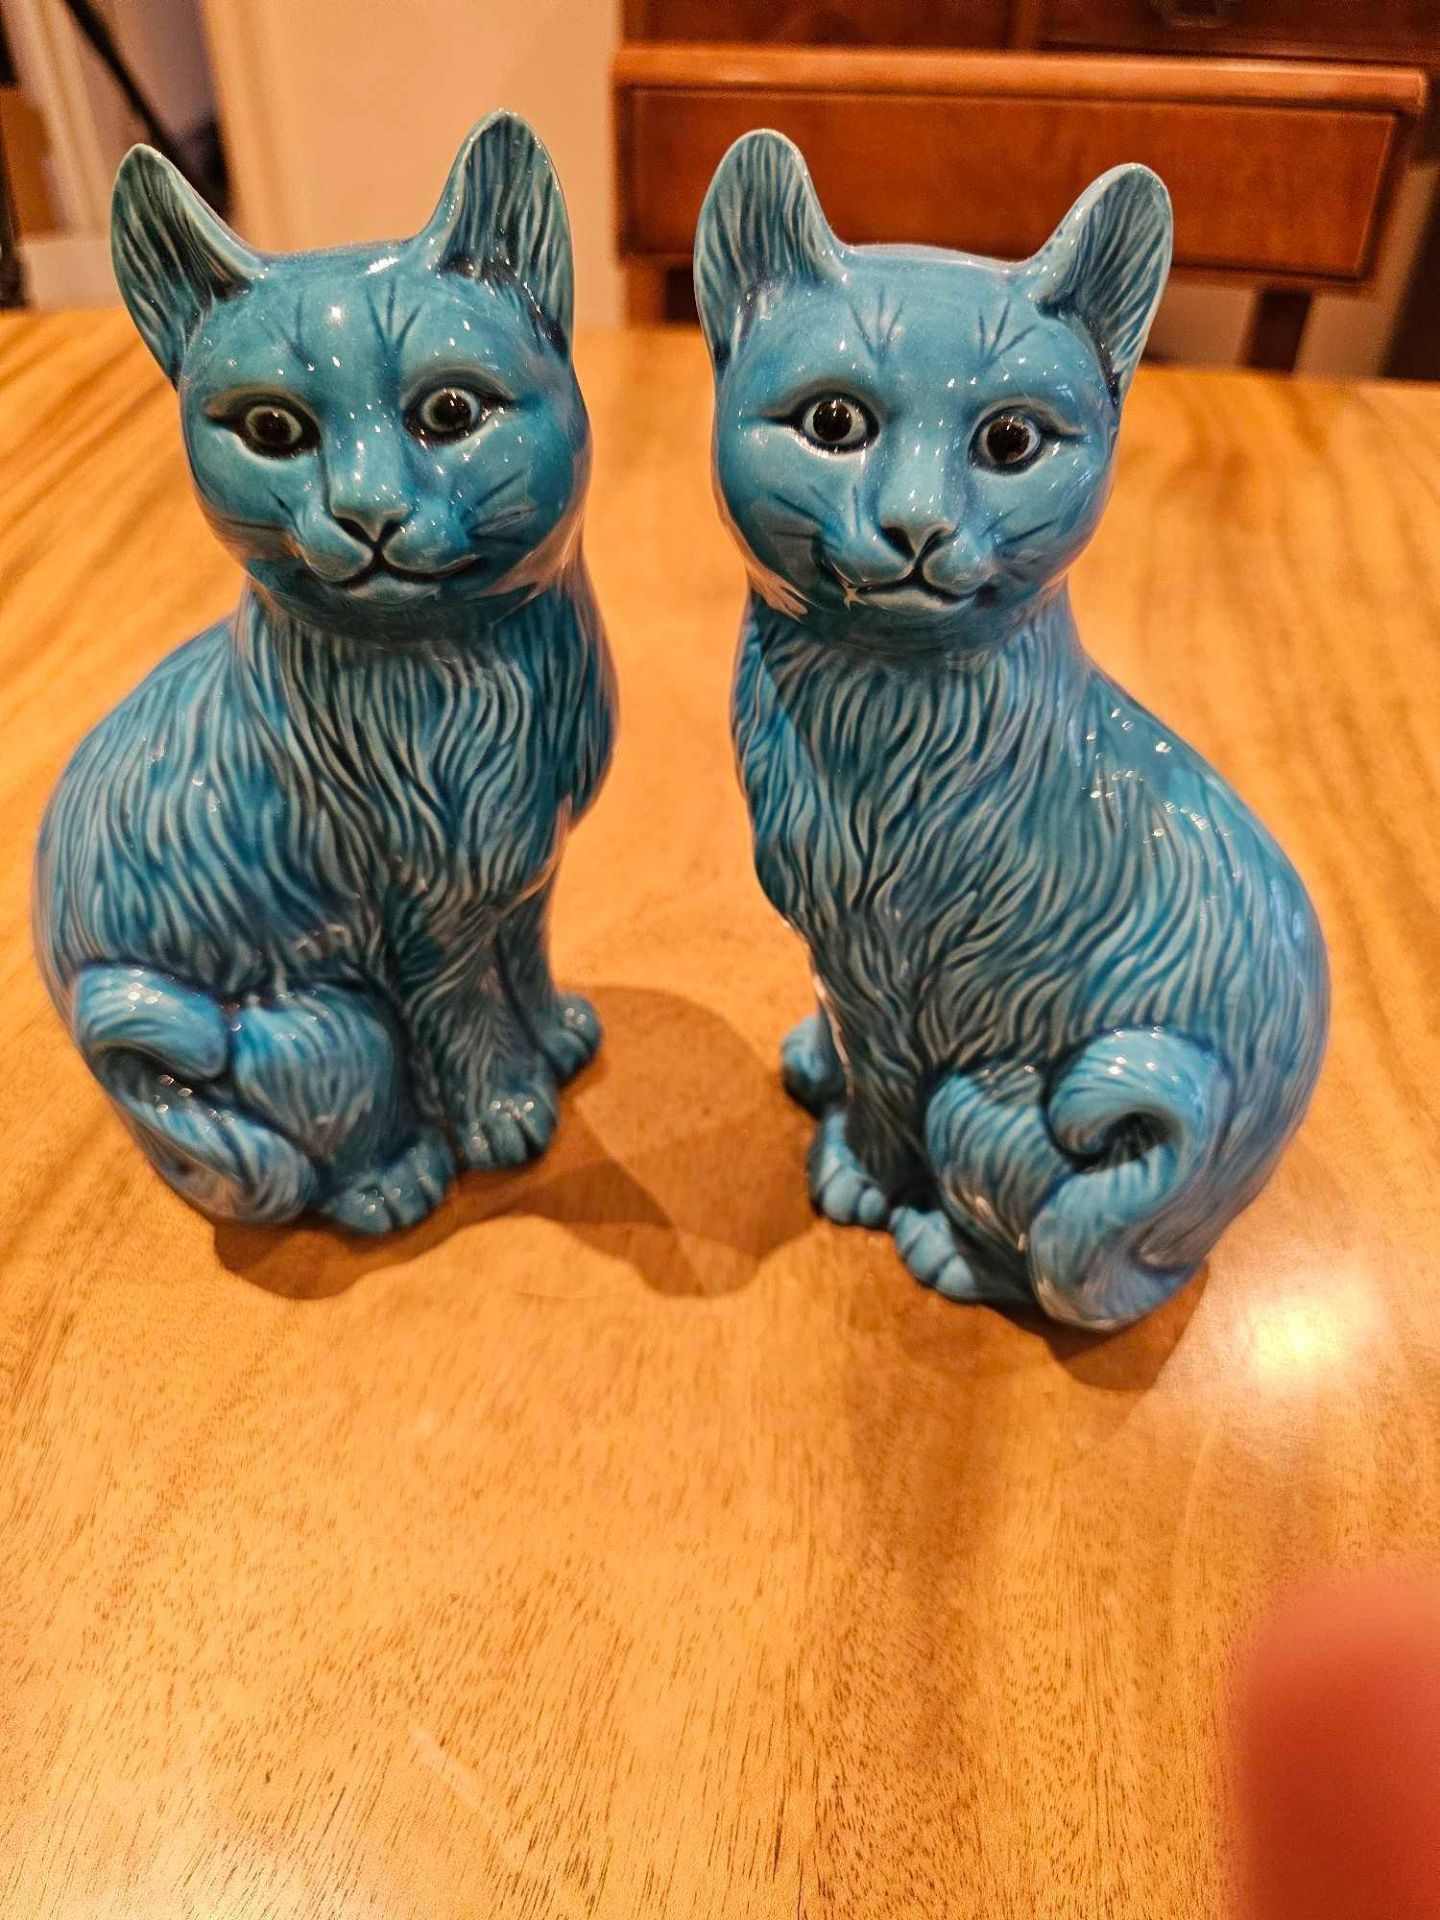 Turquoise Glazed Vintage Collectible Set Of 2 Cats - Faience Majolica Made In China